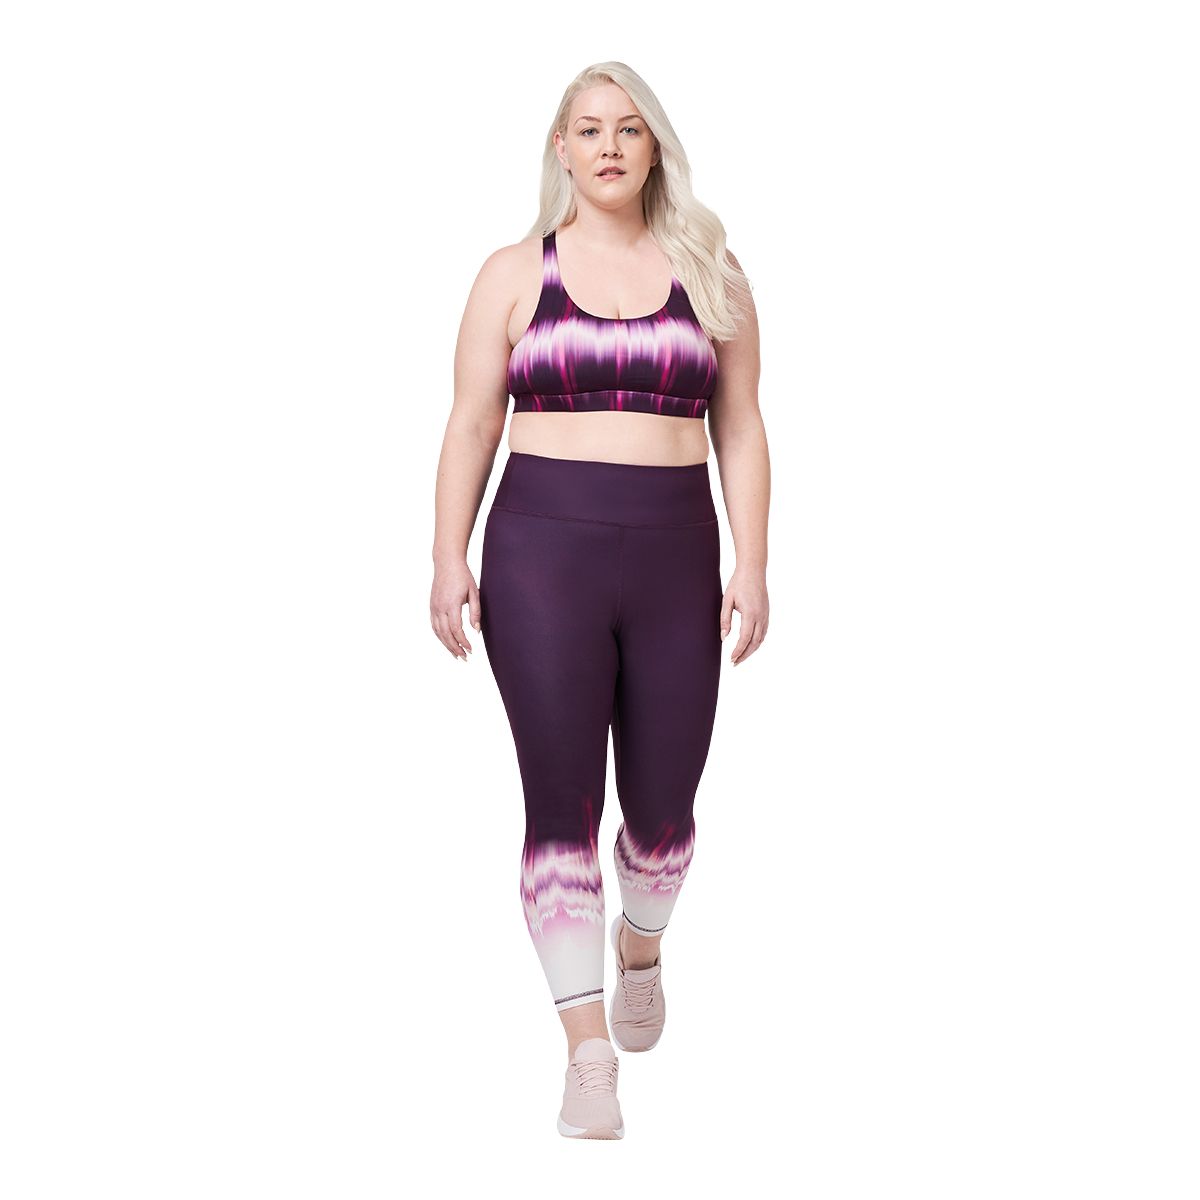 https://media-www.sportchek.ca/product/div-03-softgoods/dpt-70-athletic-clothing/sdpt-02-womens/333594121/fwd-w-plus-cre-lve-print-hr-7-8-tight-5aa857ad-465f-40f3-bc76-62c81c5dc1ca-jpgrendition.jpg?imdensity=1&imwidth=1244&impolicy=mZoom